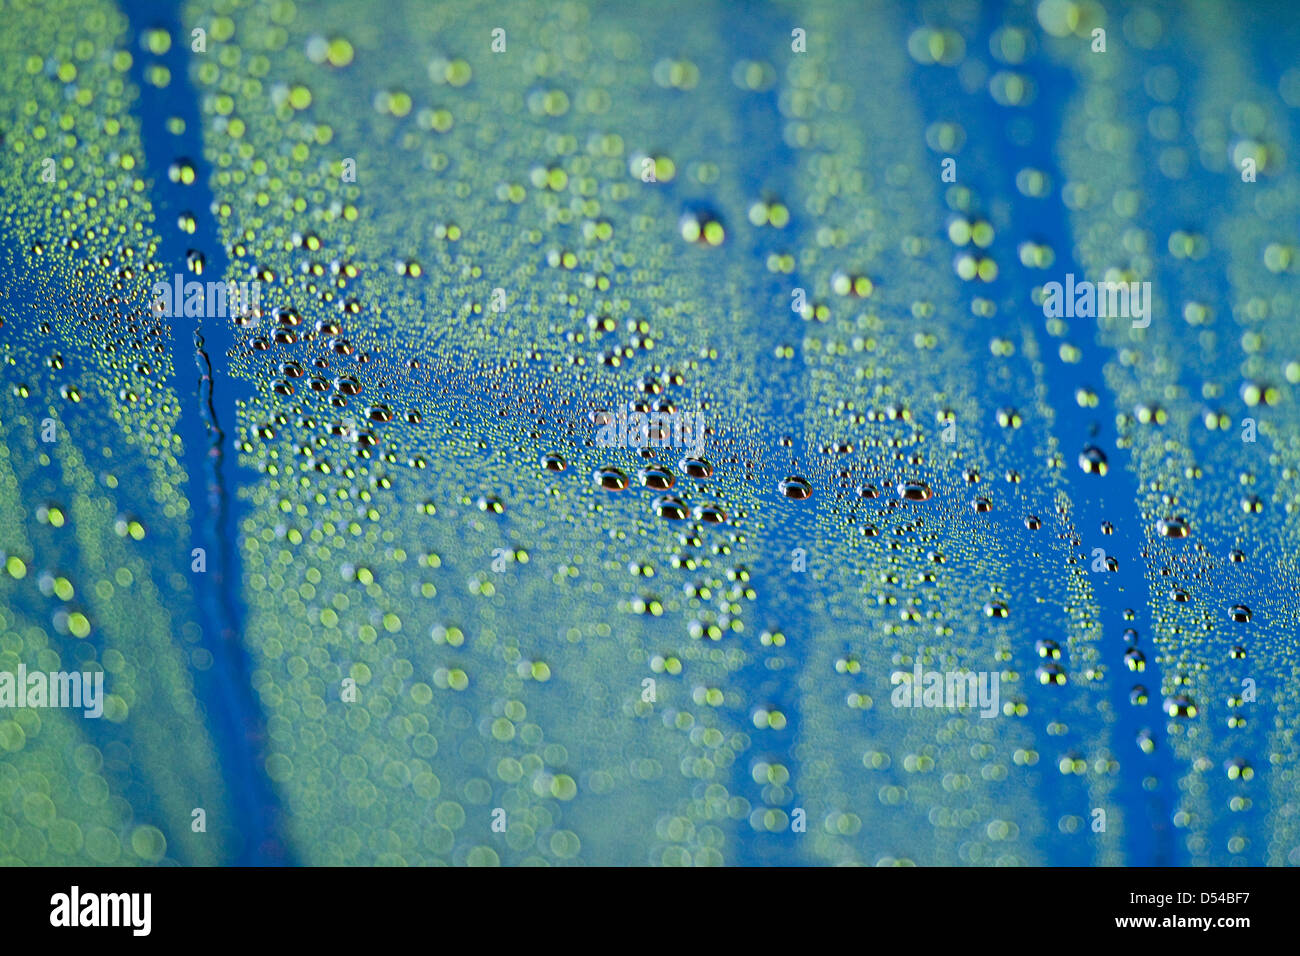 Berlin, Germany, drops on the windscreen of a car in a car wash Stock Photo